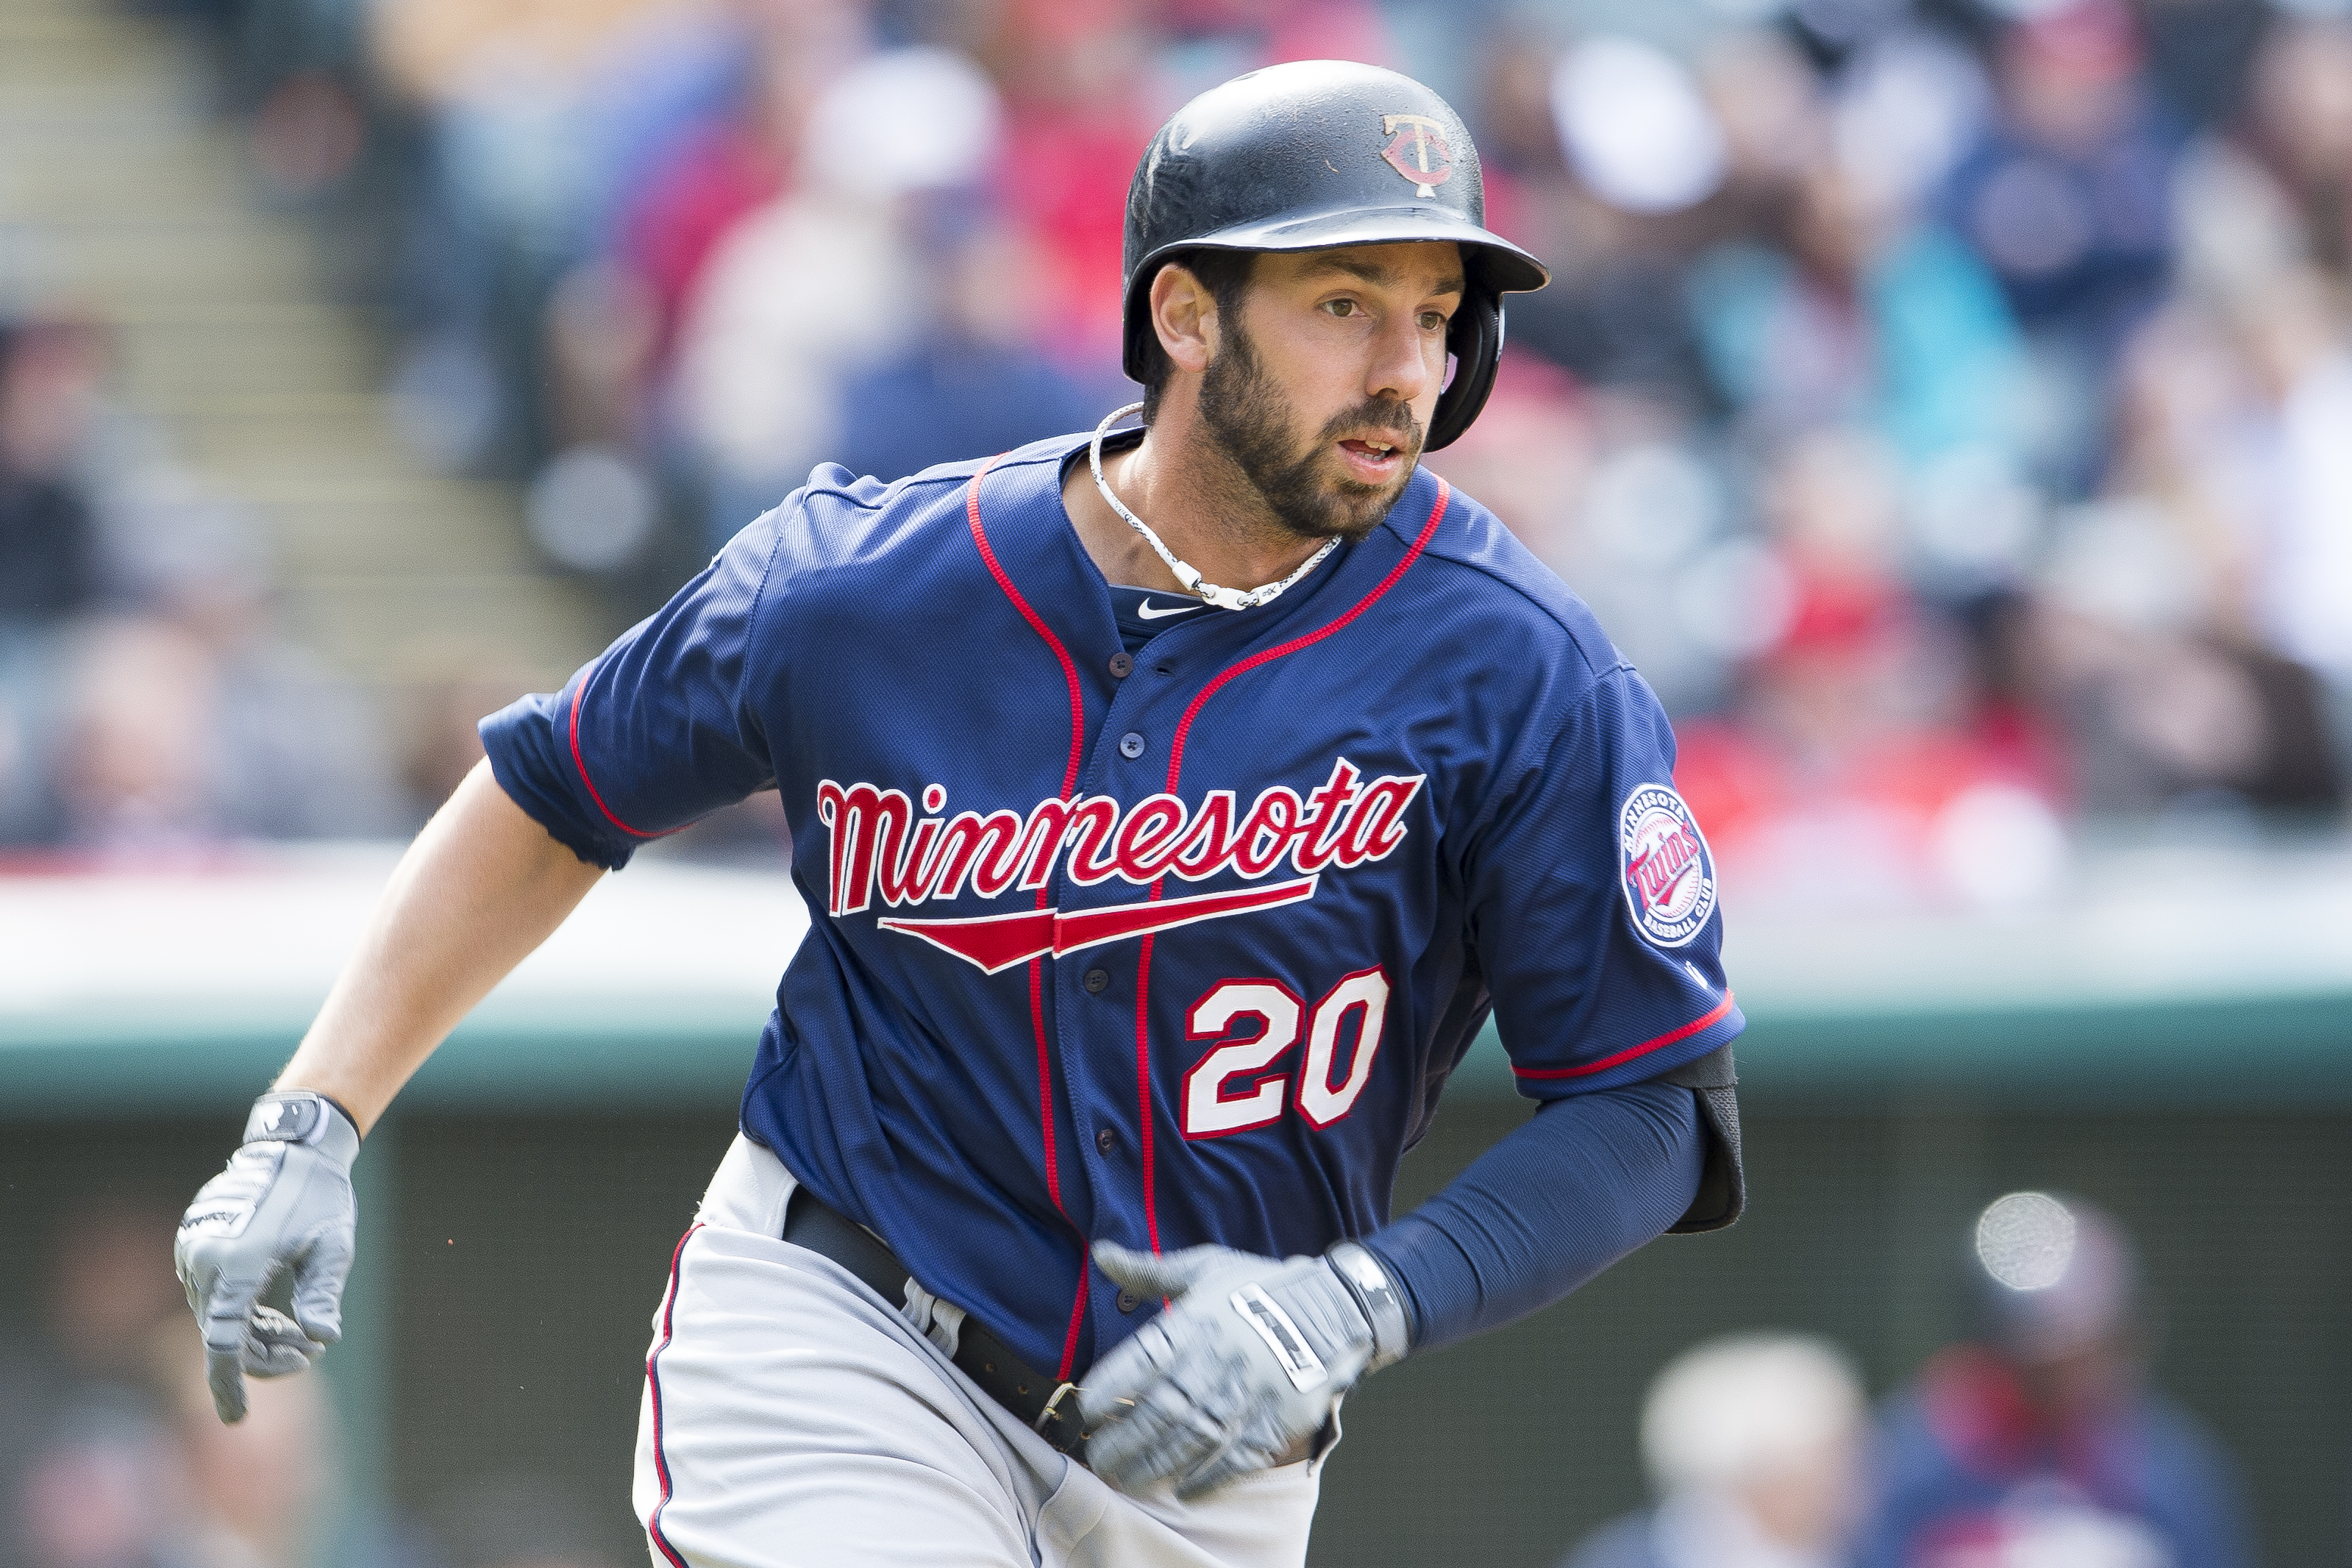 CLEVELAND, OH - APRIL 6: Chris Colabello #20 of the Minnesota Twins runs the bases after hiting a three RBI double during the sixth inning against the Cleveland Indians at Progressive Field on April 6, 2014 in Cleveland, Ohio.